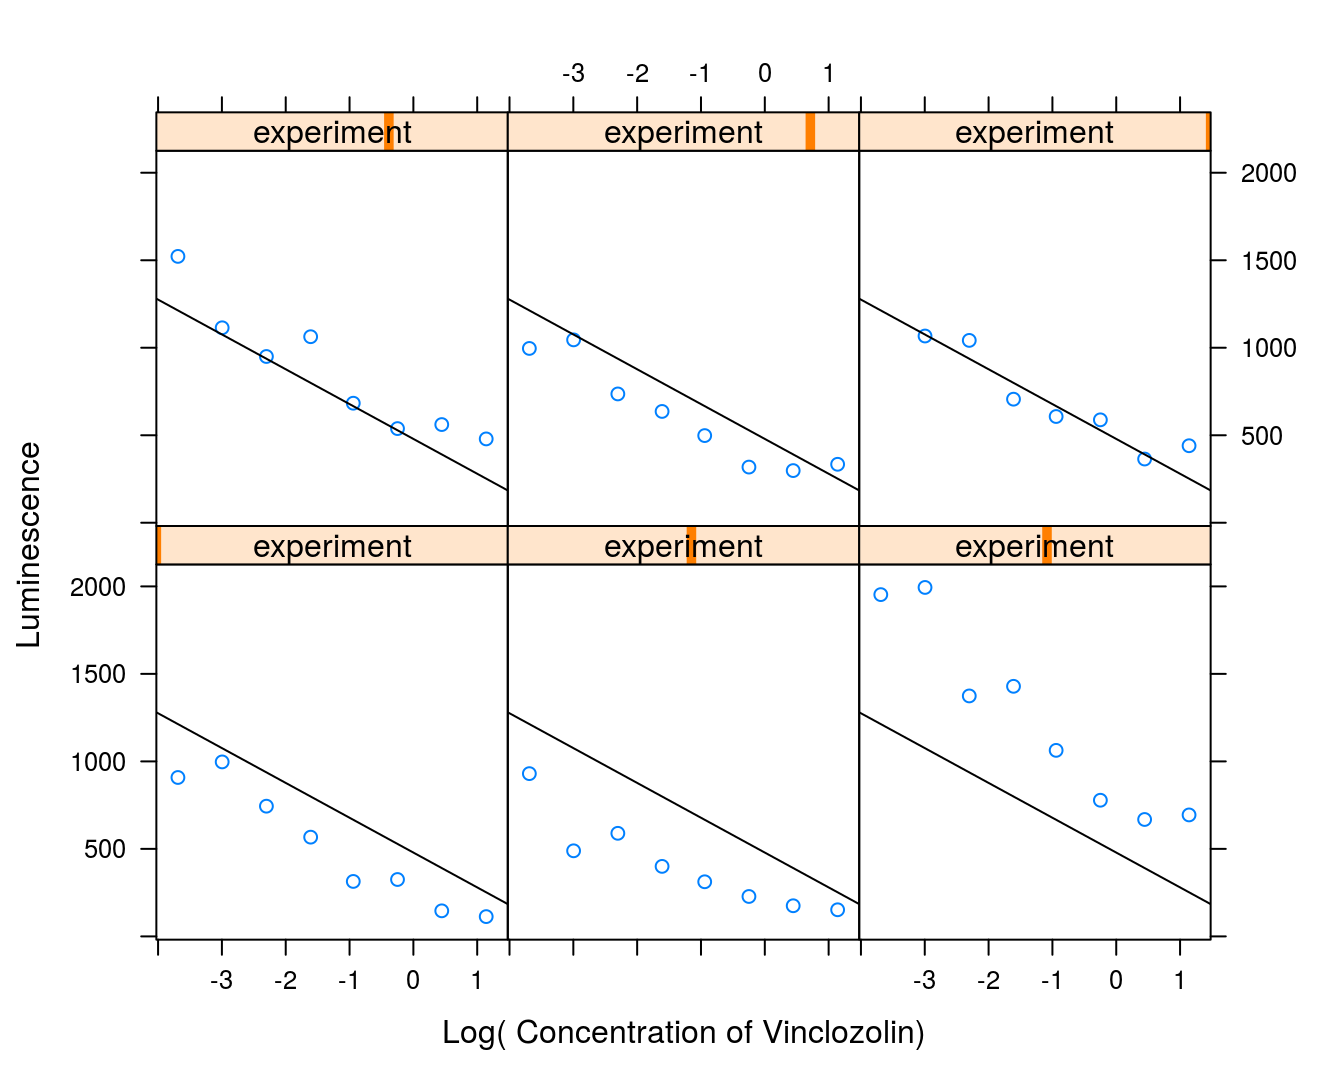 Regression lines for all 6 days shown in six panels to give an idea of the variation among days. There appear to be particularly large differences between the responses and the regression lines for the three days in the lower panels.